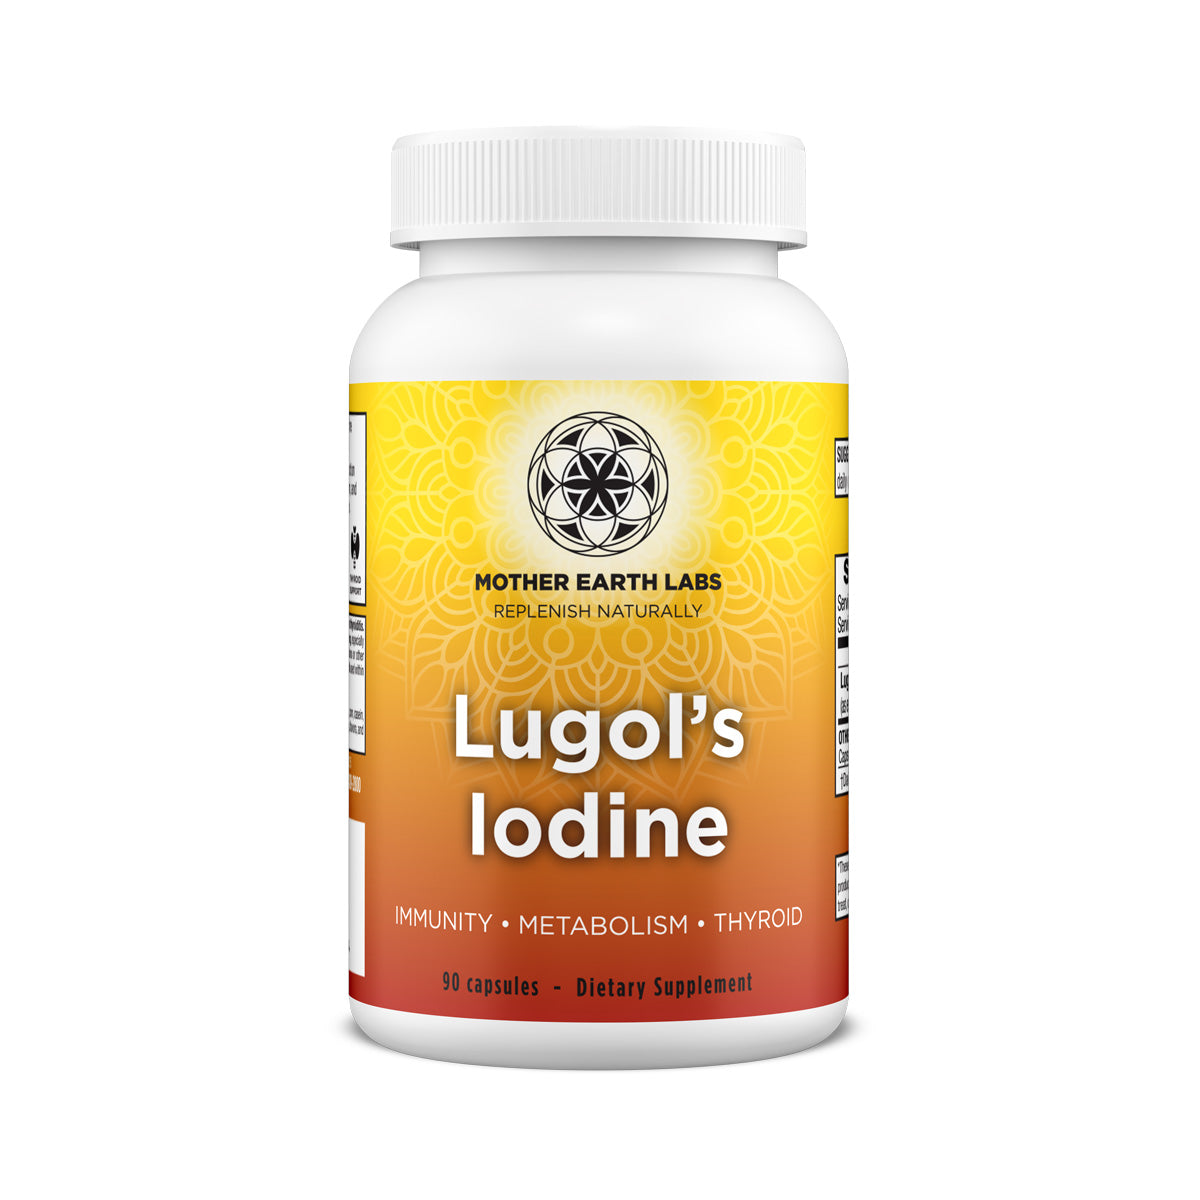 Lugol's Iodine - 90 Capsules | Mother Earth Labs